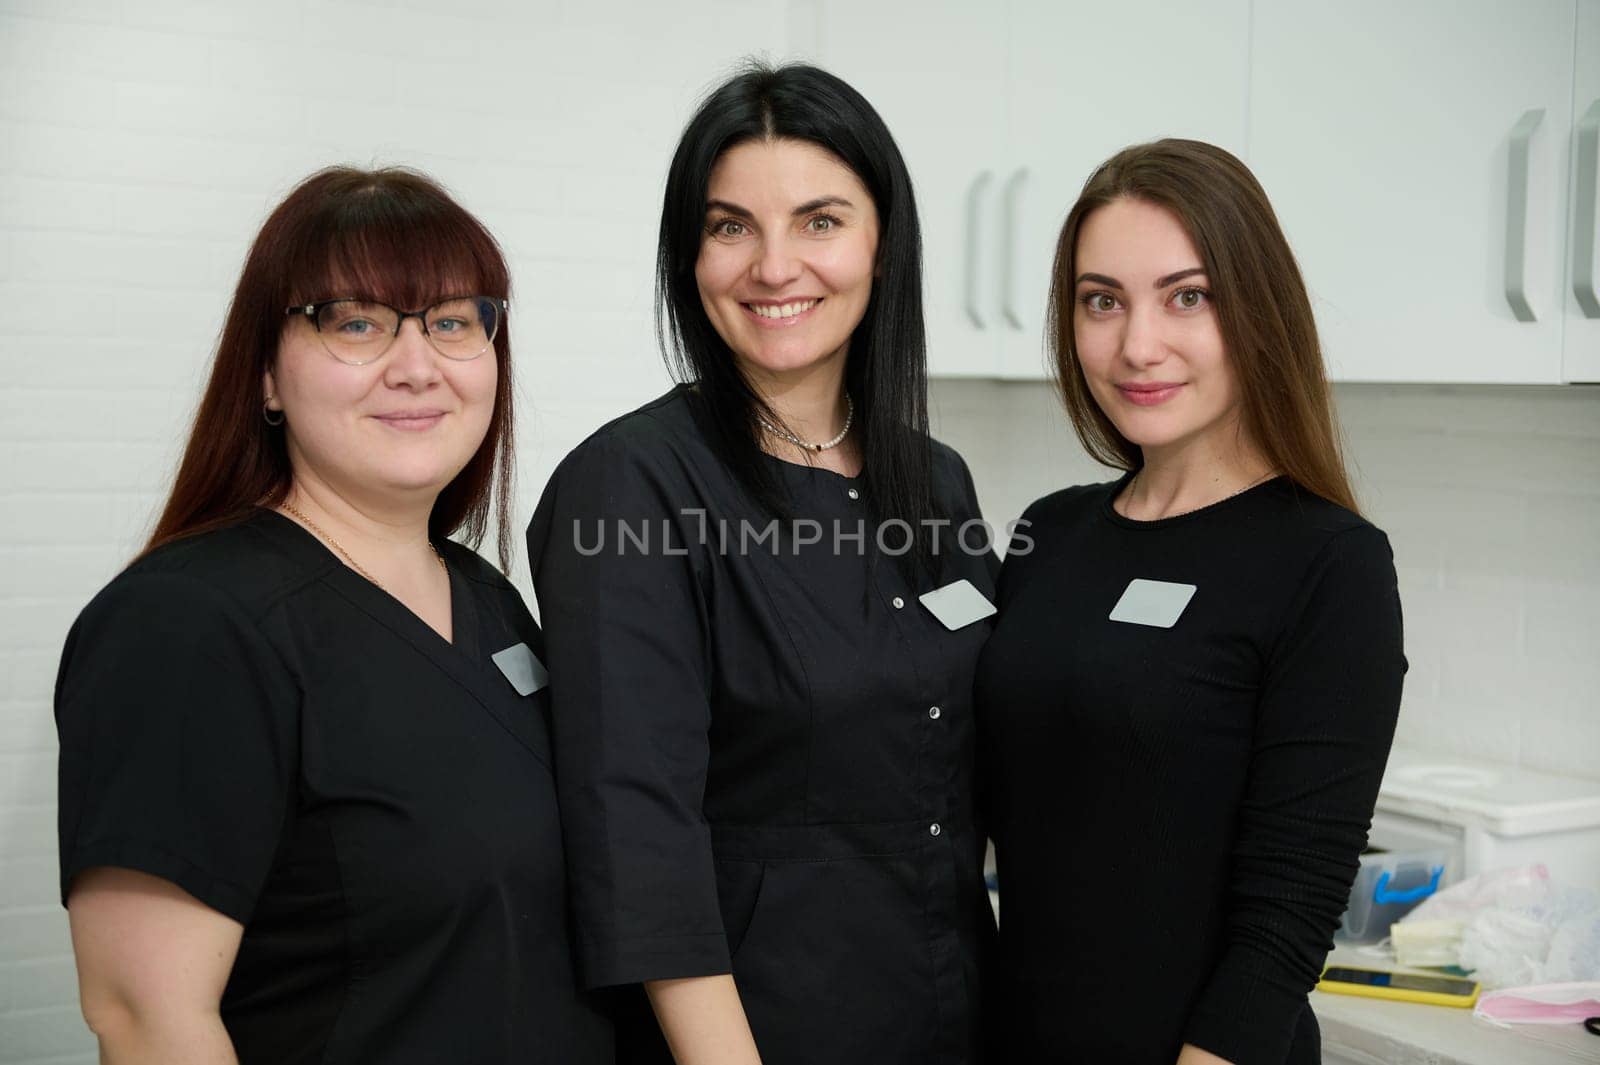 Confident portrait of beautiful diverse women, experienced team of female dentists doctors, dental hygienists in stylish black medical uniform, smiling looking at camera, standing in dentistry office